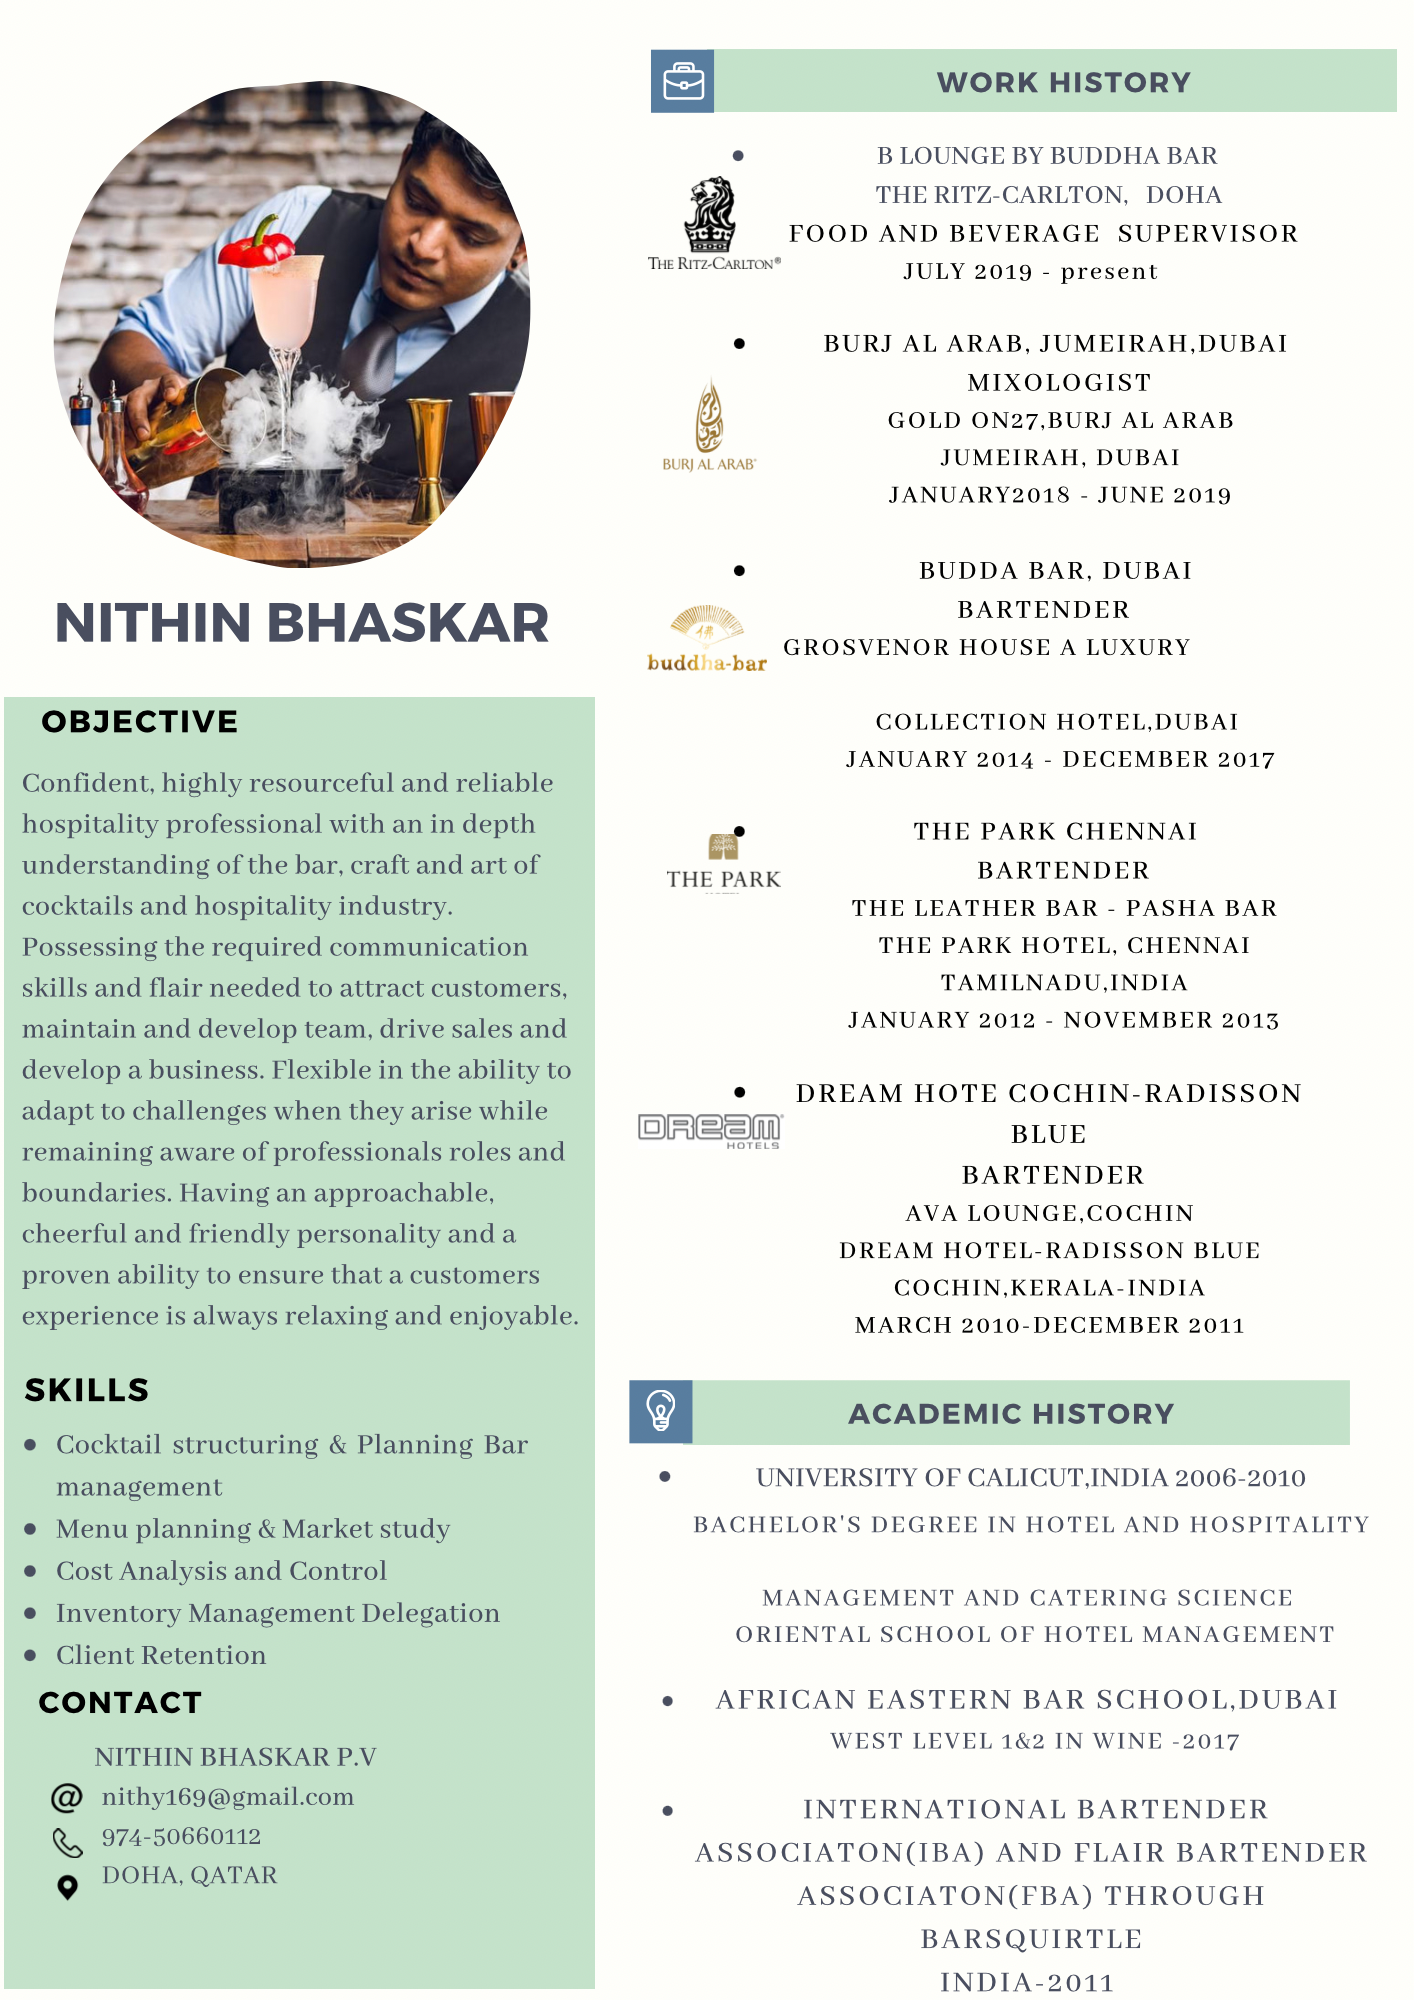 NITHIN BHASKAR

OBJECTIVE

Confident, highly resourceful and reliable
hospitality professional with an in depth
understanding of the bar, craft and art of
cocktails and hospitality industry.
Possessing the required communication
skills and flair needed to attract customers.
maintain and develop team, drive sales and
develop a business. Flexible in the ability to
adapt to challenges when they arise while
remaining aware of professionals roles and
boundaries. Having an approachable,
cheerful and friendly personality and a

proven ability to ensure that a customers

experience is always relaxing and enjoyable.

SKILLS

® Cocktail structuring & Planning Bar
management

e Menu planning & Market study

® Cost Analysis and Control

® Inventory Management Delegation

e Client Retention

CONTACT

NITHIN BHASKAR P.V
@ nithvi69@gmail.com
1 974-50660112

YOHA. QAT/
© DOHA QATAR

WORK HISTORY

 

° B LOUNGE BY BUDDHA BAR

THE RITZ-CARLTON, DOHA
FOOD AND BEVERAGE SUPERVISOR

JULY 2019 - present

. BURJ AL ARAB, JUMEIRAH.DUBAI
MIXOLOGIST

7)

5 GOLD ON27.BURJ AL ARAB

&

JUMEIRAH. DUBAI
JANUARY201S - JUNE 2019

. BUDDA BAR. DUBAI
BARTENDER
| GROSVENOR HOUSE A LUXURY
budd bar
COLLECTION HOTEL.DUBAI

JANUARY 2014 - DECEMBER 2017

THE PARK CHENNAI

ed

BARTENDER
THE LEATHER BAR - PASHA BAR
THE PARK HOTEL. CHENNAI
TAMILNADU INDIA
JANUARY 2012 - NOVEMBER 2013

THE PARK

¢ DREAM HOTE COCHIN-RADISSON
OREEW BLUE
BARTENDER
AVA LOUNGE.COCHIN
DREAM HOTEL-RADISSON BLUE
COCHIN. KERALA-INDIA
MARCH 2010-DECEMBER 2011

El ACADEMIC HISTORY

. UNIVERSITY OF CALICUT. INDIA 2006-2010

BACHELOR'S DEGREE IN HOTEL AND HOSPITALITY

MANAGEMENT AND CATERING SCIENCE
ORIENTAL SCHOOL OF HOTEL MANAGEMENT

e AFRICAN EASTERN BAR SCHOOL.DUBAI
WEST LEVEL 1&2 IN WINE 2017

° INTERNATIONAL BARTENDER
ASSOCIATON(IBA) AND FLAIR BARTENDER
ASSOCIATON(FBA) THROUGH
BARSQUIRTLE
INDIA-2011